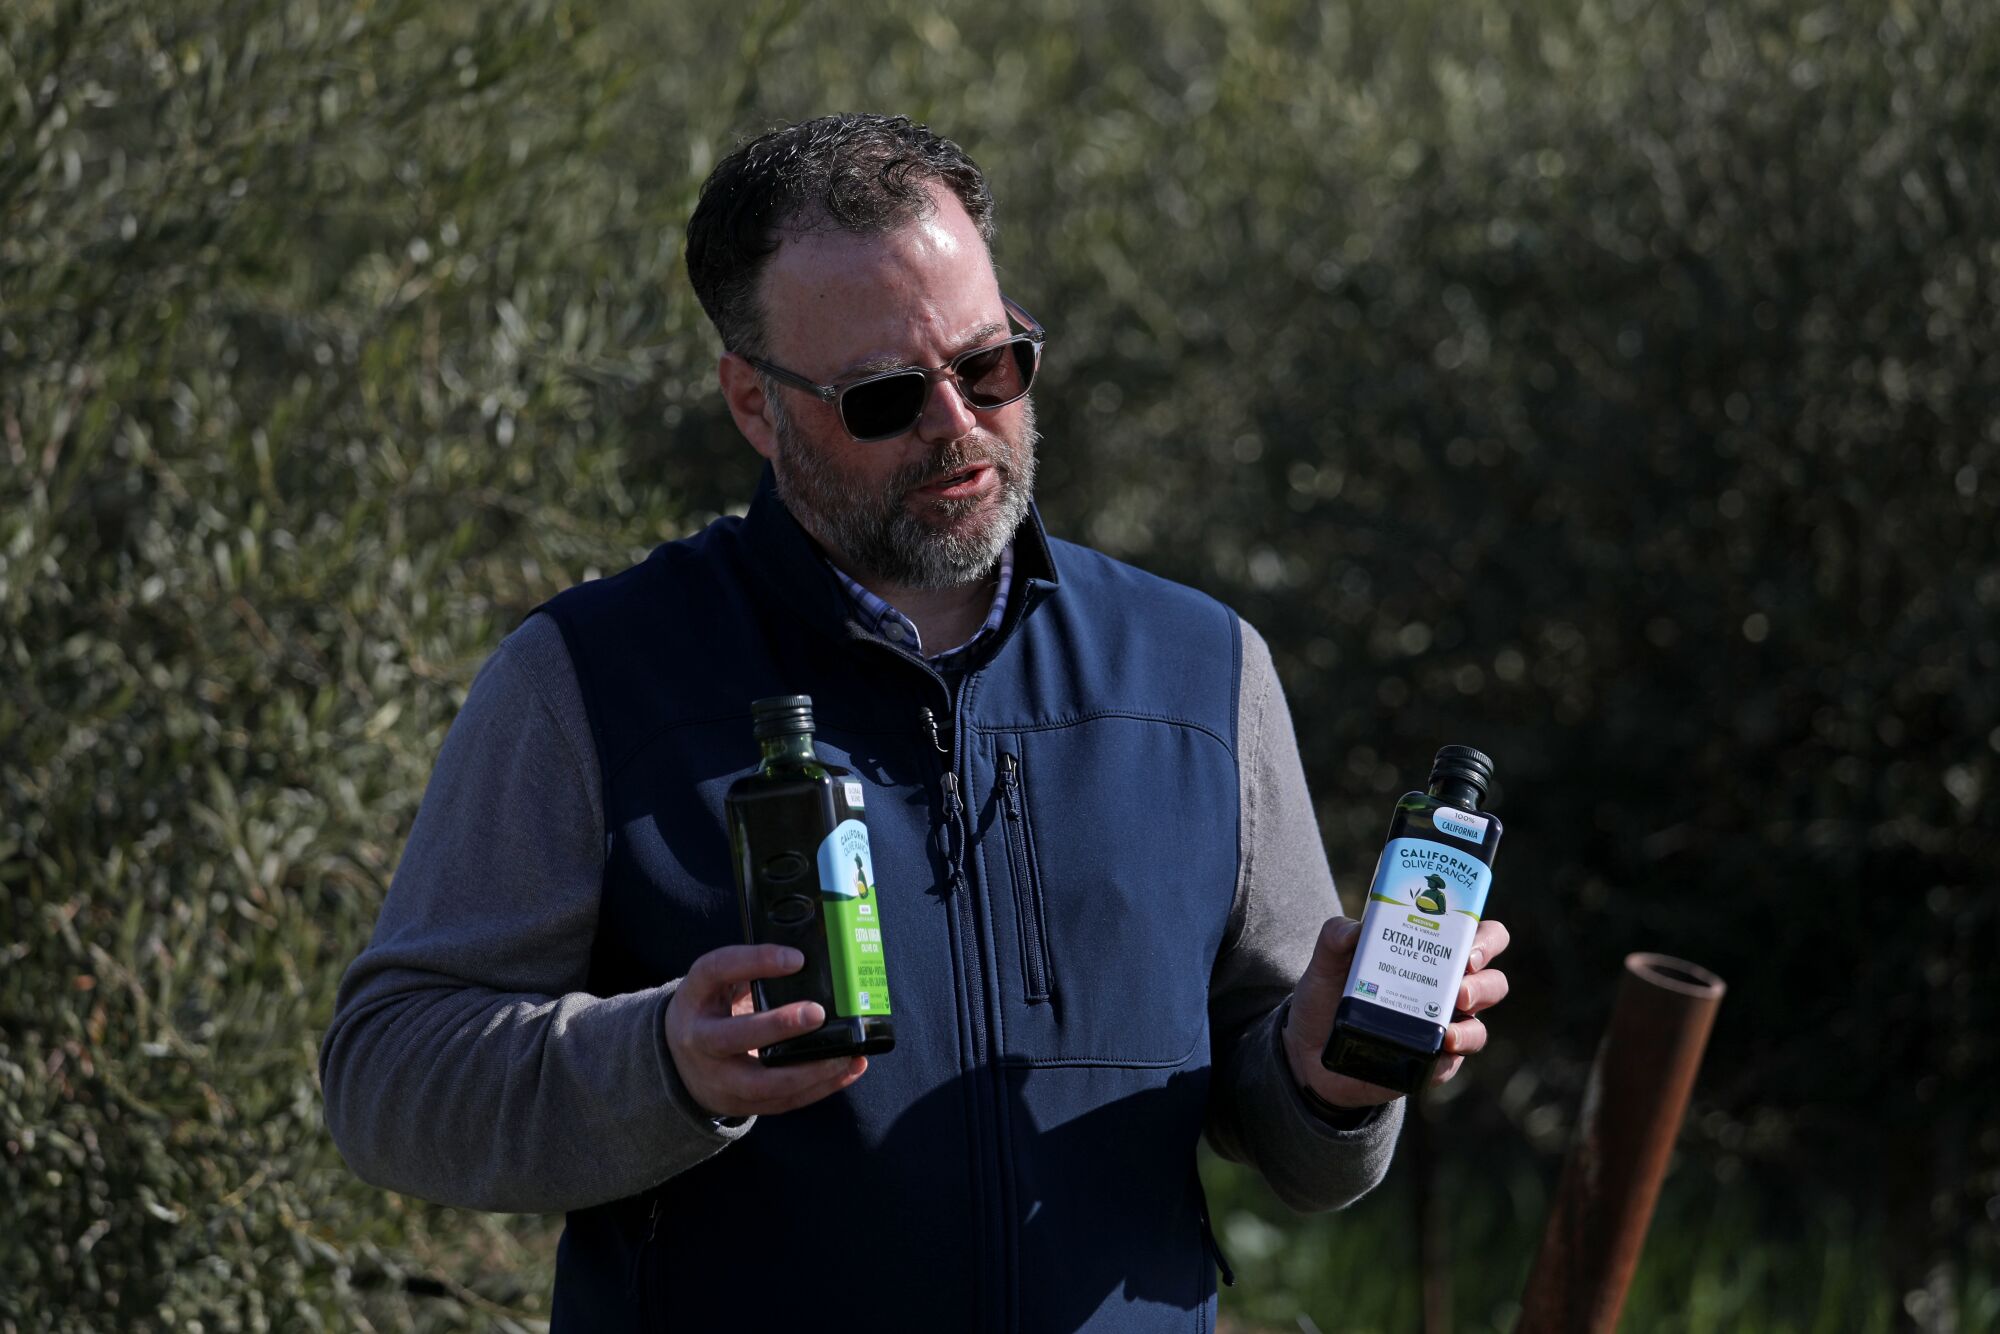 Michael Fox, chief executive of California Olive Ranch, holds bottles of the company's offerings